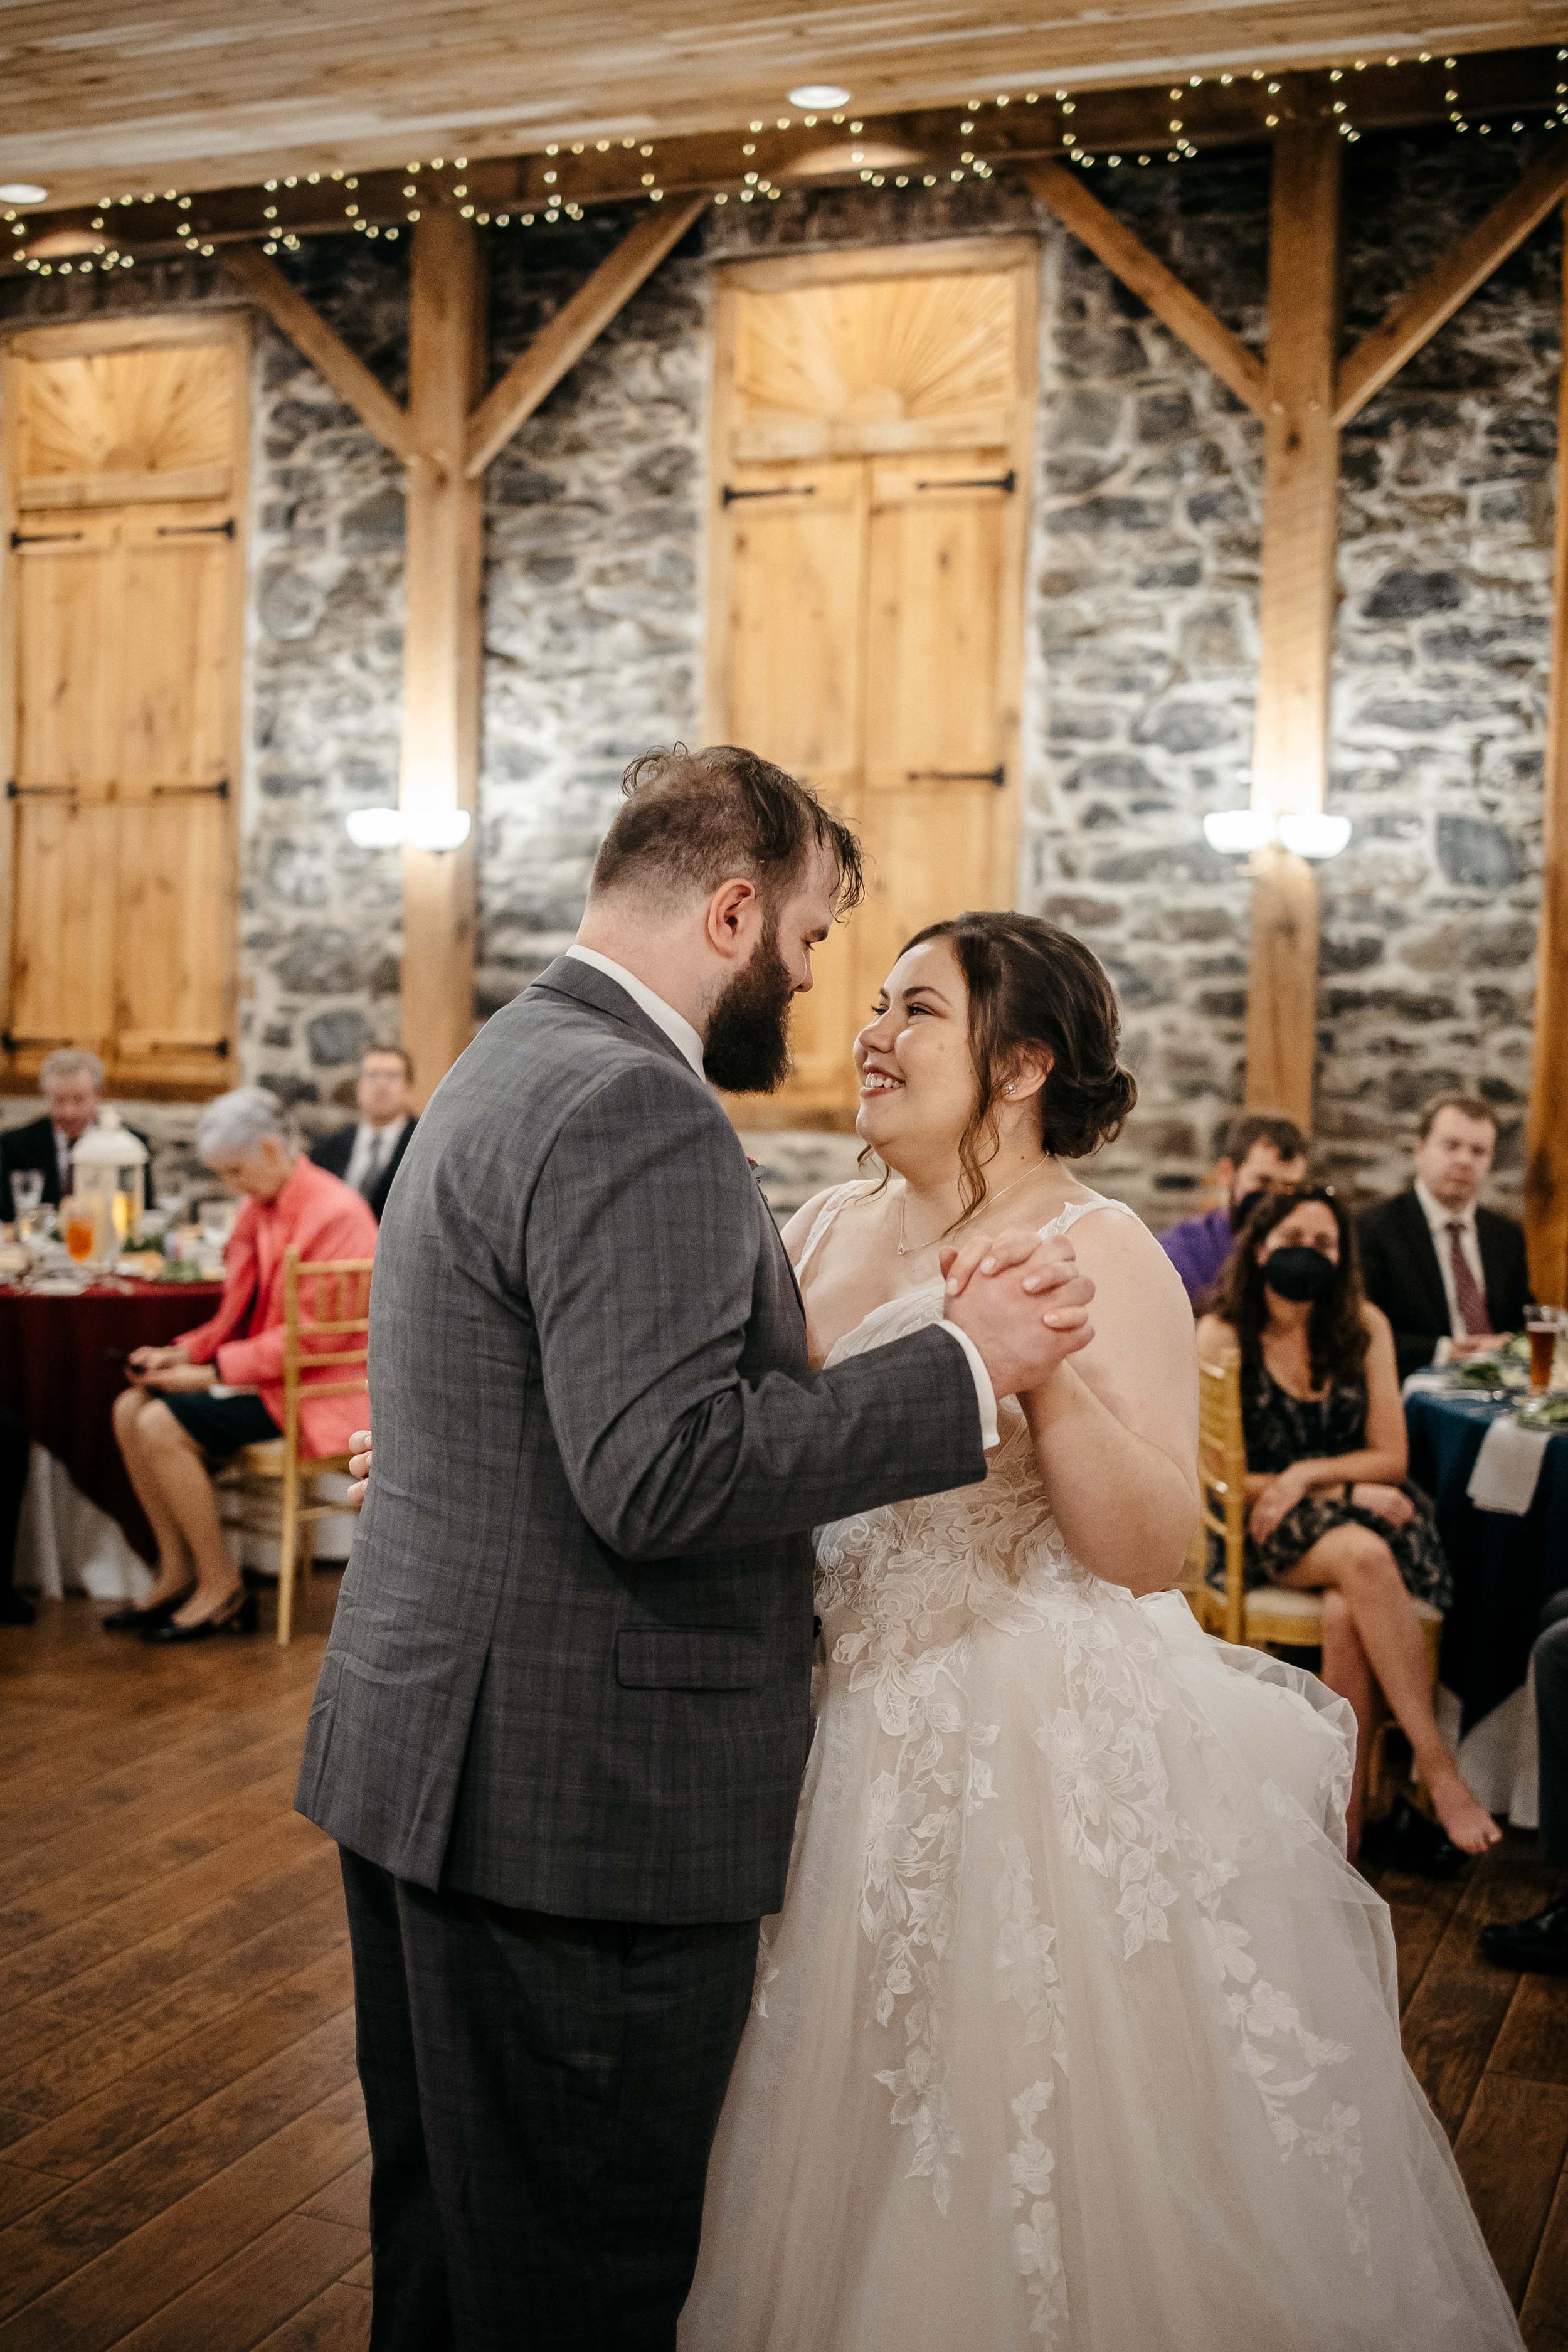 A first dance at Kings Mill.